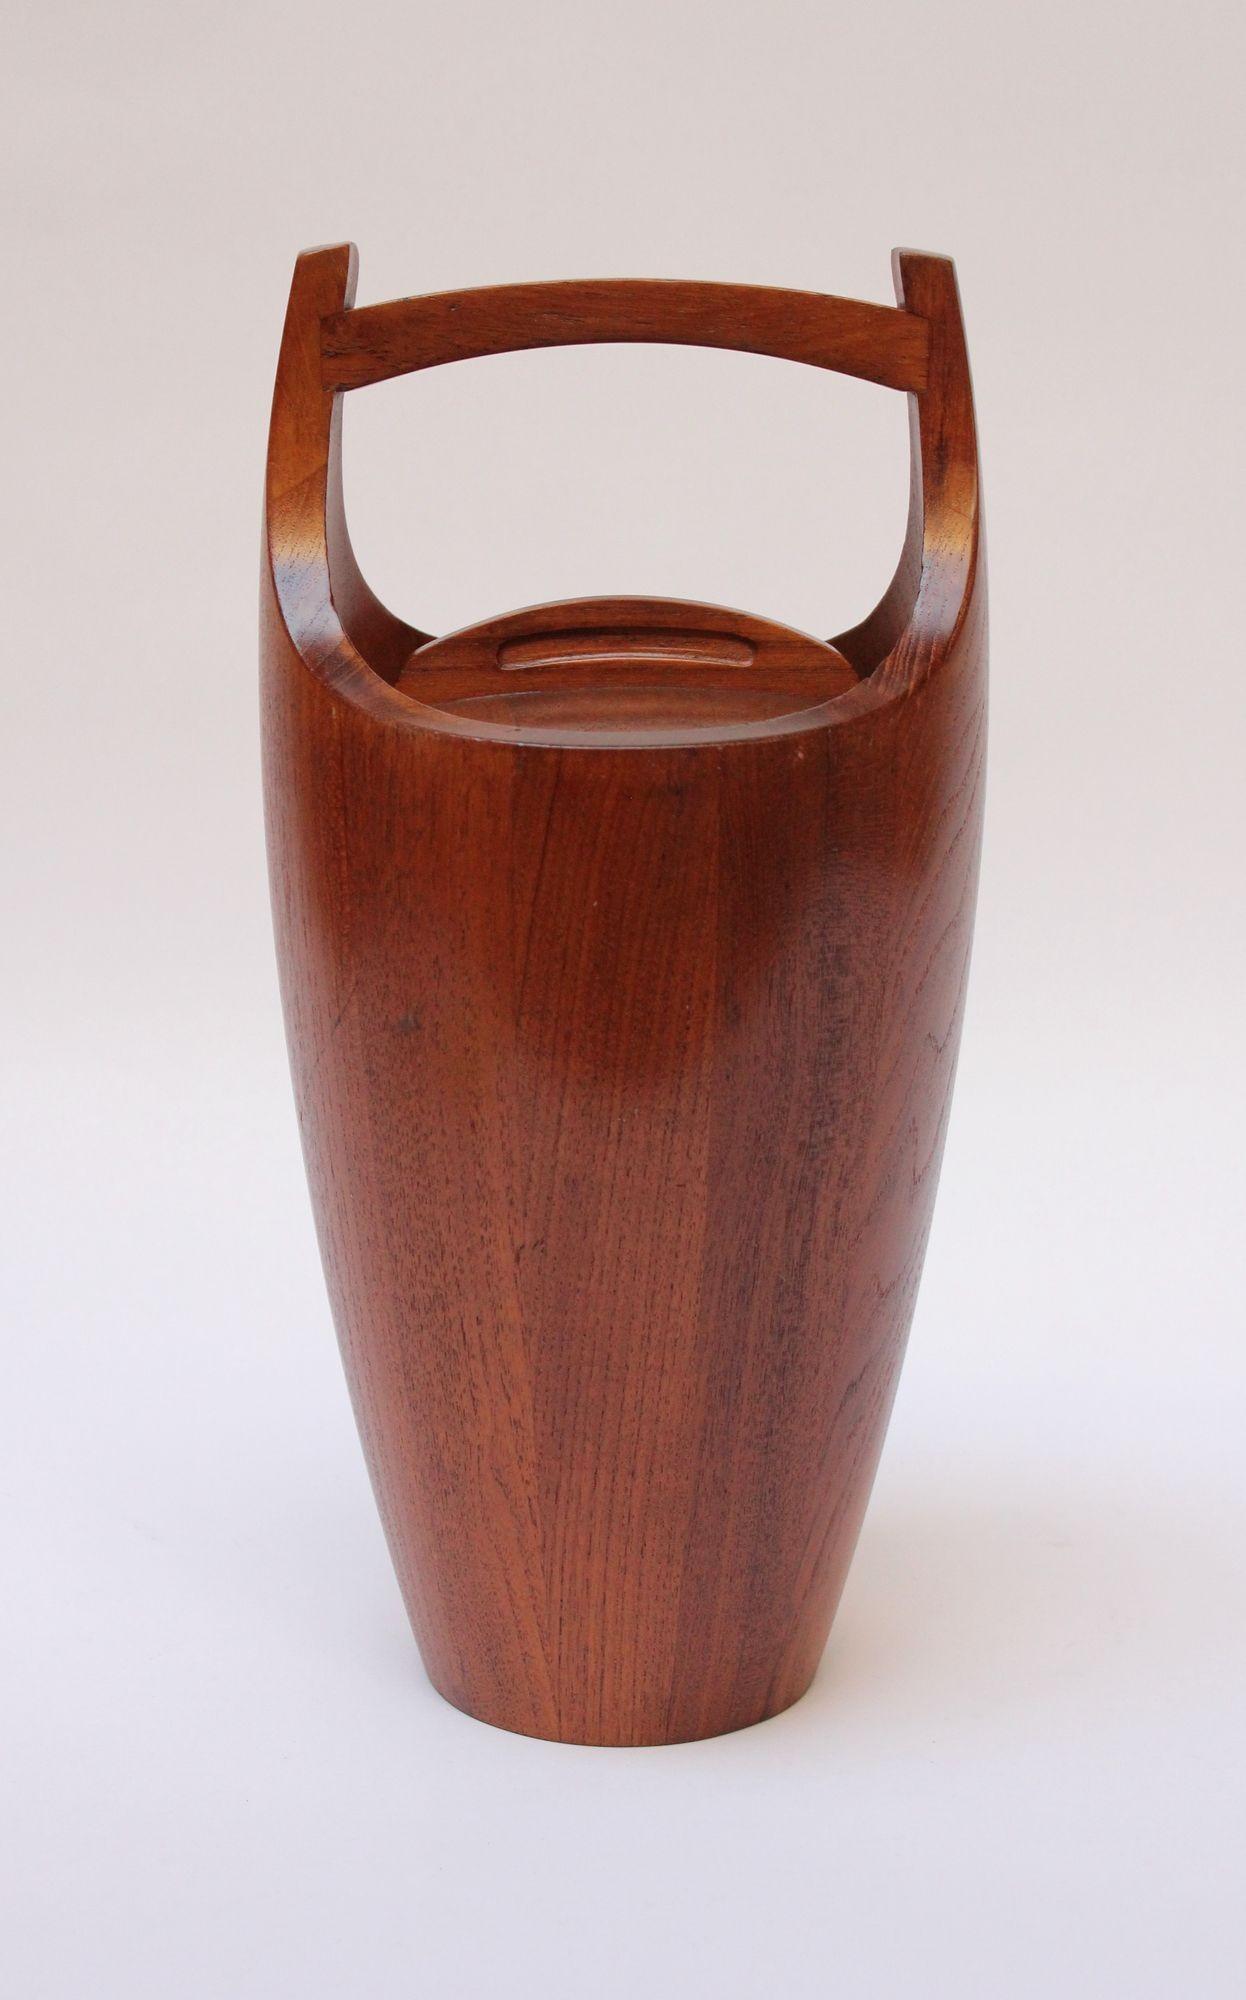 Dansk 'Congo' ice bucket in staved teak designed by Jens Quistgaard for Dansk. Iconic, sculptural early example with signature orange plastic interior liner. 
One scratch present along with a couple of impressions to the exterior and light veneer